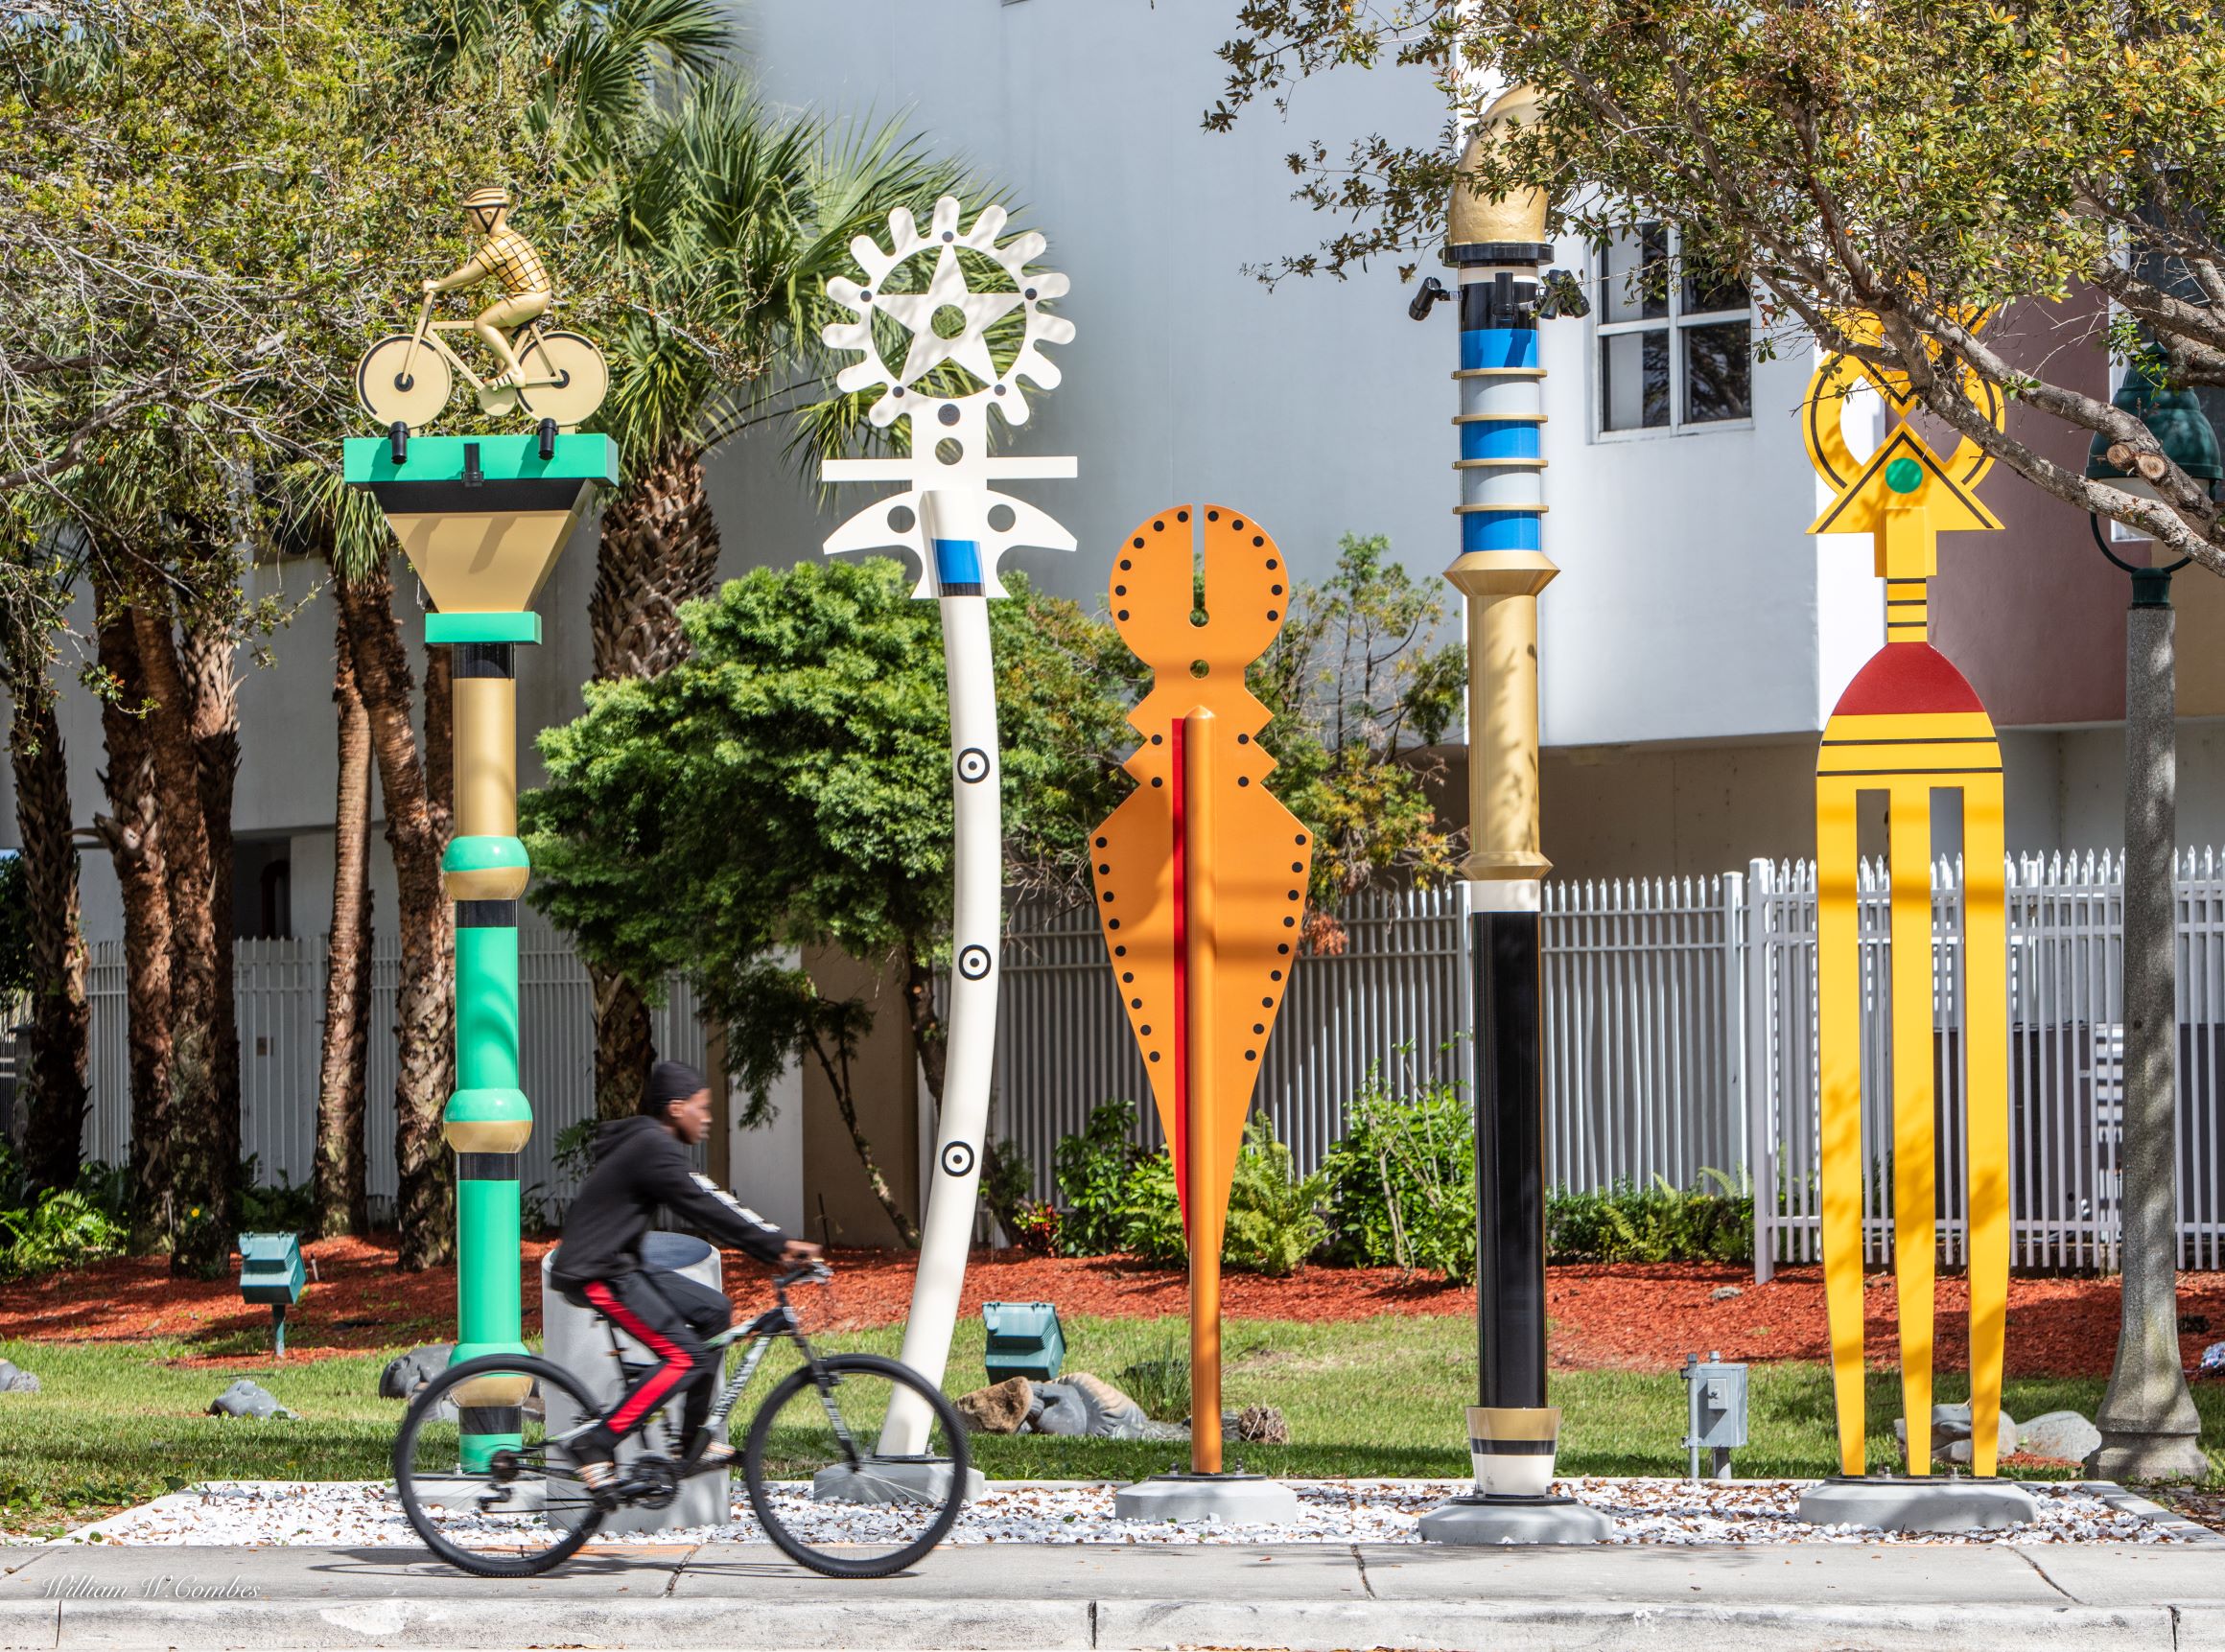 Public art is part of the Northwest 27th Avenue Safe Streets Improvement Project, a multi-modal street design to encourage public transport, bicycling and walking. The new site-specific artwork commissioned by Broward Cultural Division’s Public Art & Design Program, has been installed in Fort Lauderdale’s Sistrunk neighborhood.